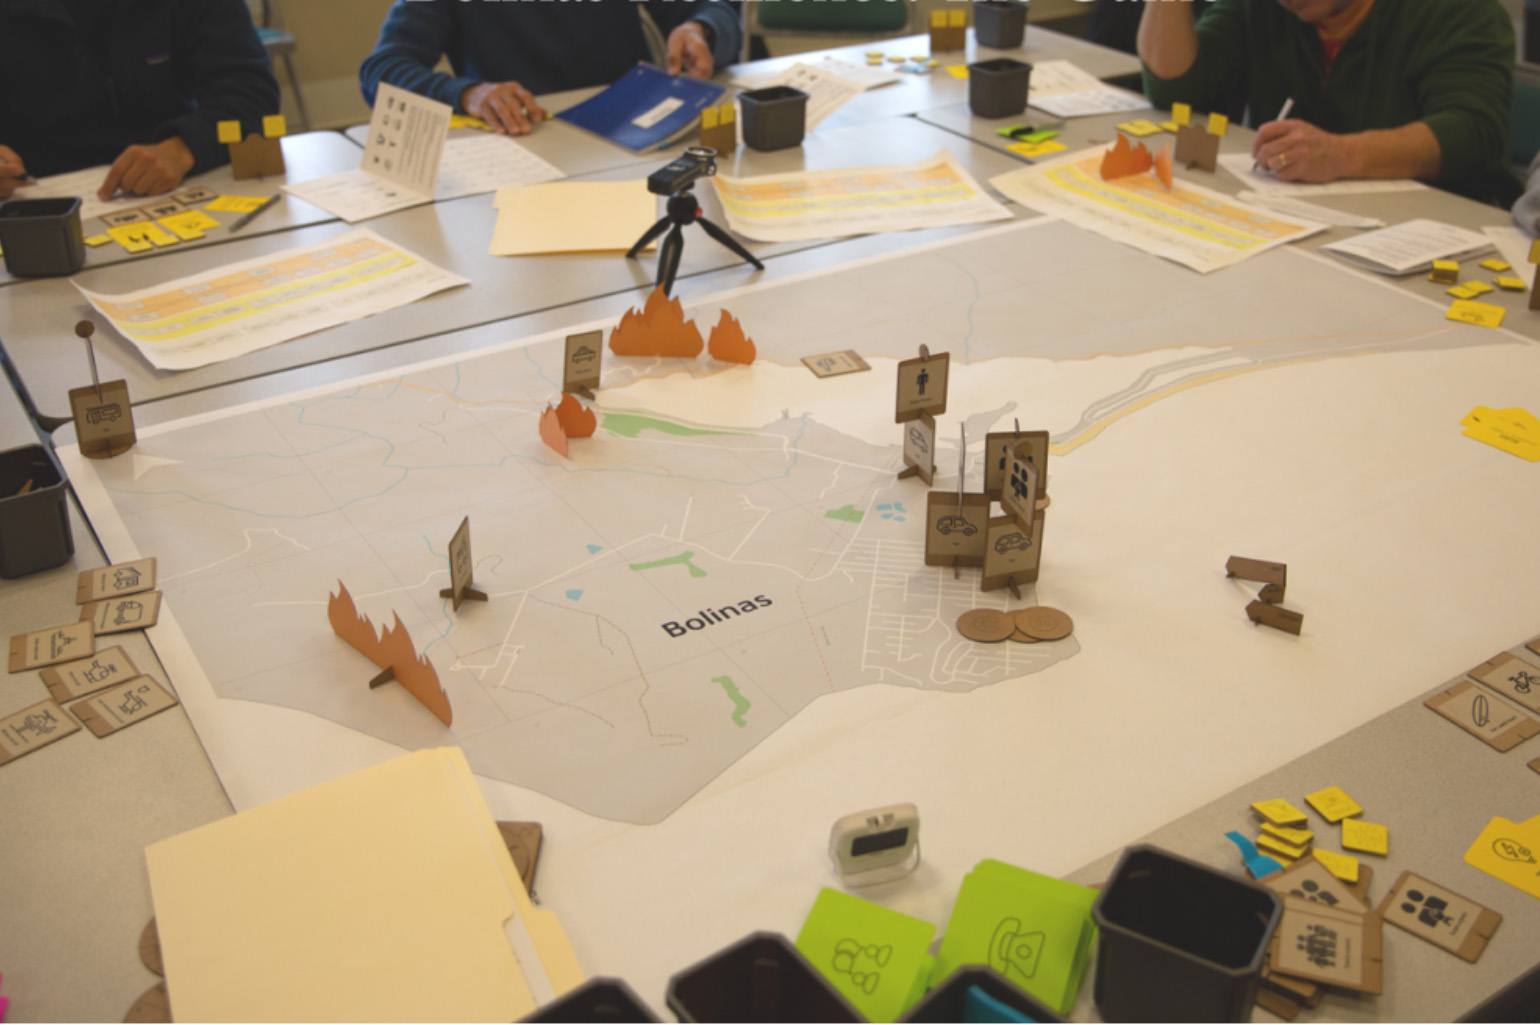 A board game on a conference room table. The game space, a map of Bolinas, California, is printed on a large piece of paper. Cardboard game pieces are placed around the map, with squares labeled to indicate individual vehicles and flame shapes indicating wildfire. Scattered on the table around the board are notebooks, pens and game cards. At the top and right edges are three people with only their hands visible. They appear to be writing notes, flipping through notebooks and looking at game pieces.